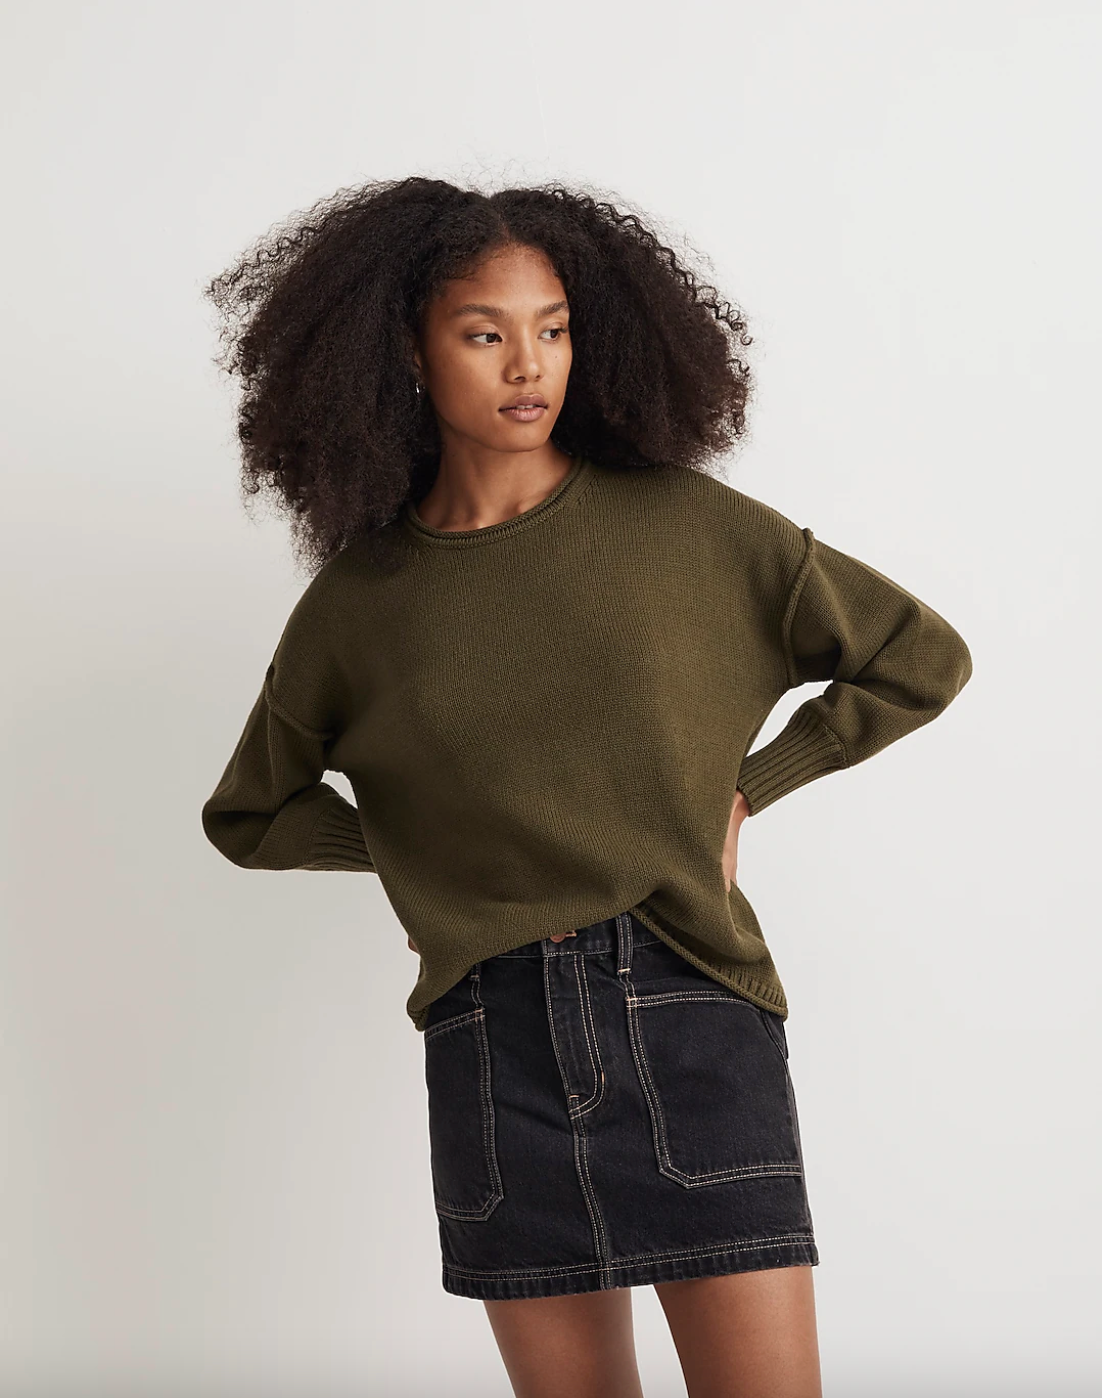 Madewell + Conway Pullover